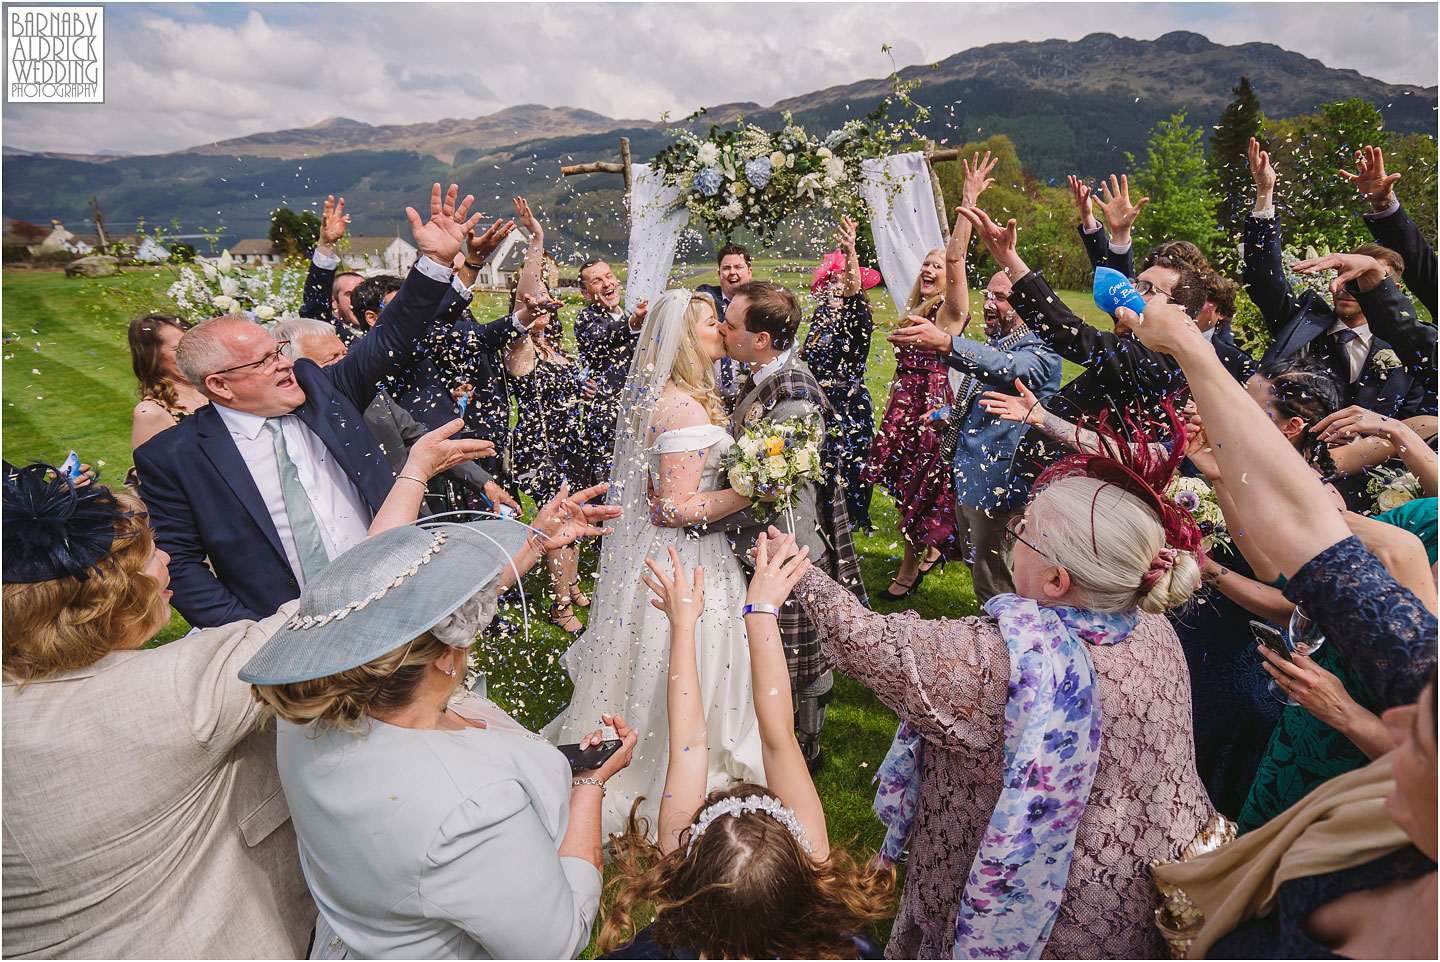 A bride and groom in a kilt kiss under a dramatic confetti throw at their wedding at Carrick Castle Estate Lodge Barn on Loch Goil in Scotland